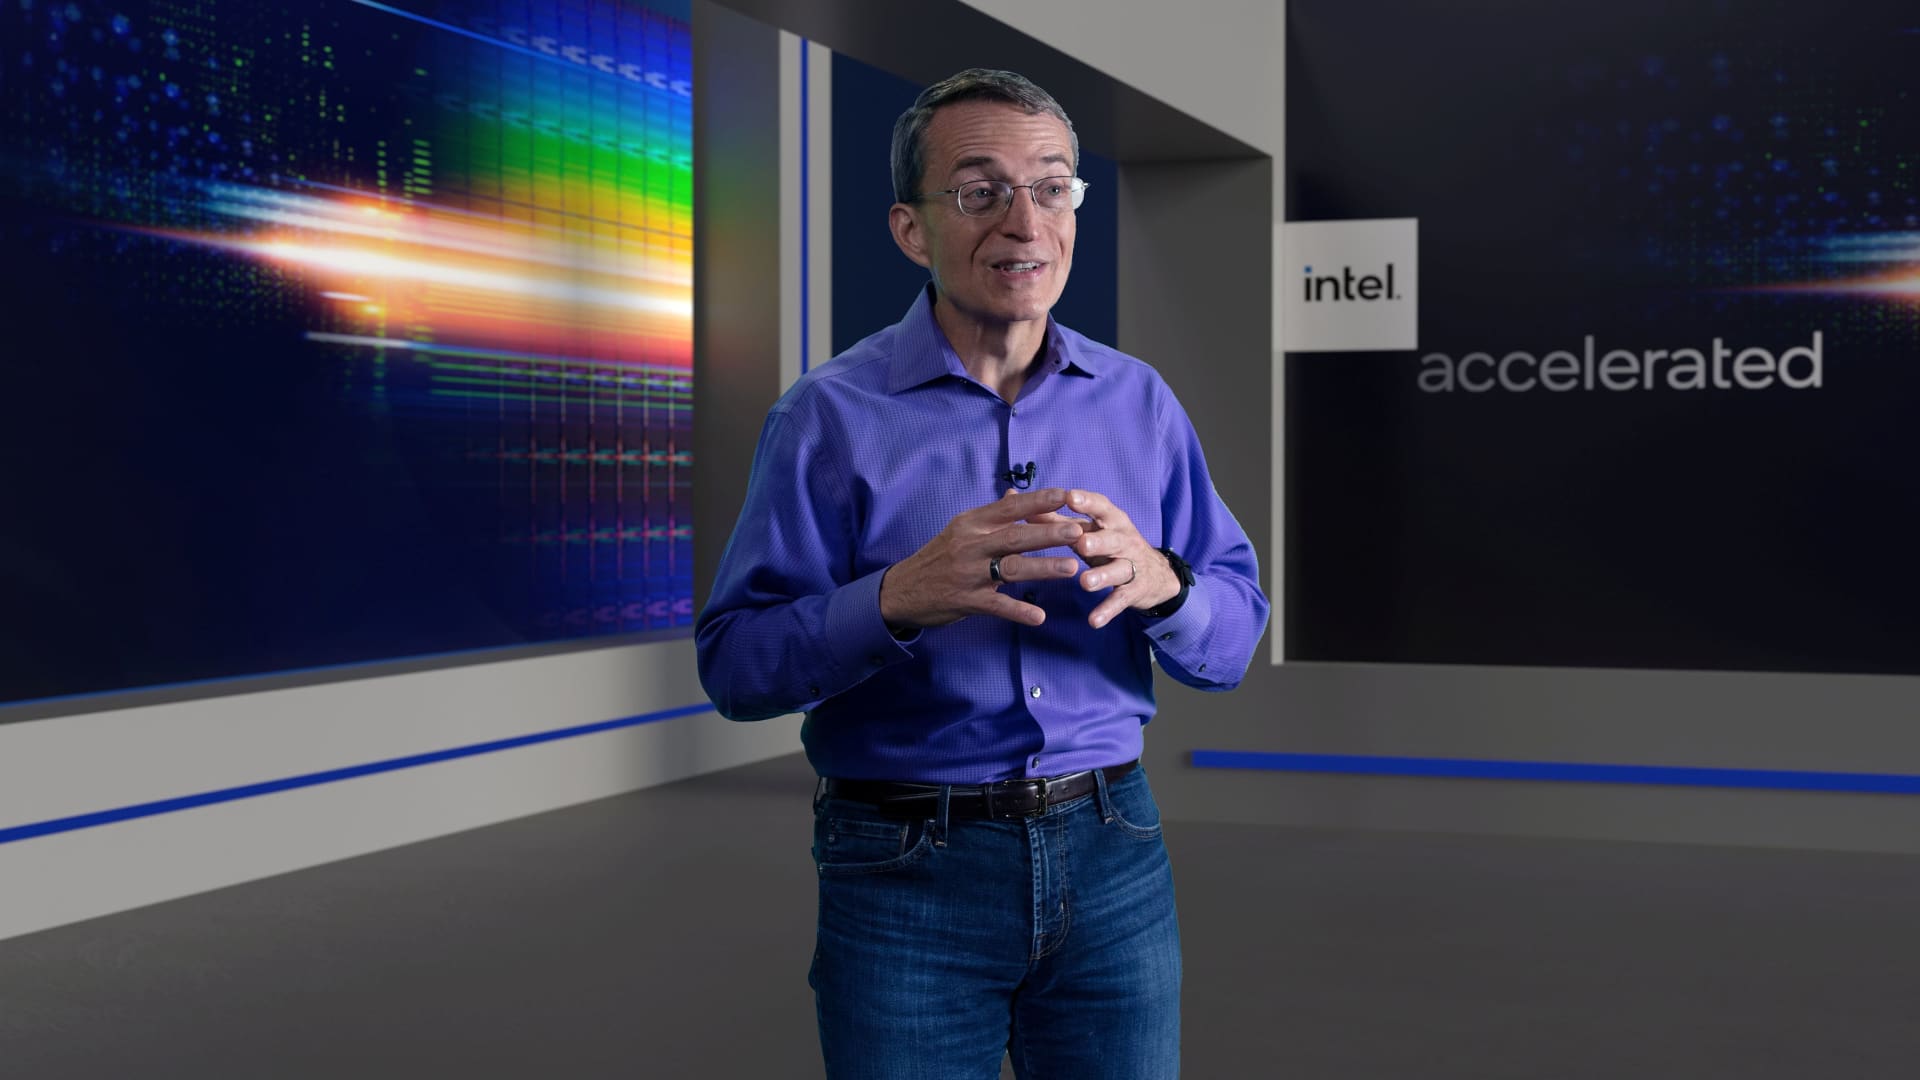 Intel Corp Chief Executive Officer Pat Gelsinger speaks in an undated handout photo obtained on July 26, 2021, as the company announced a four-year plan to overtake its rivals in chipmaking technology.